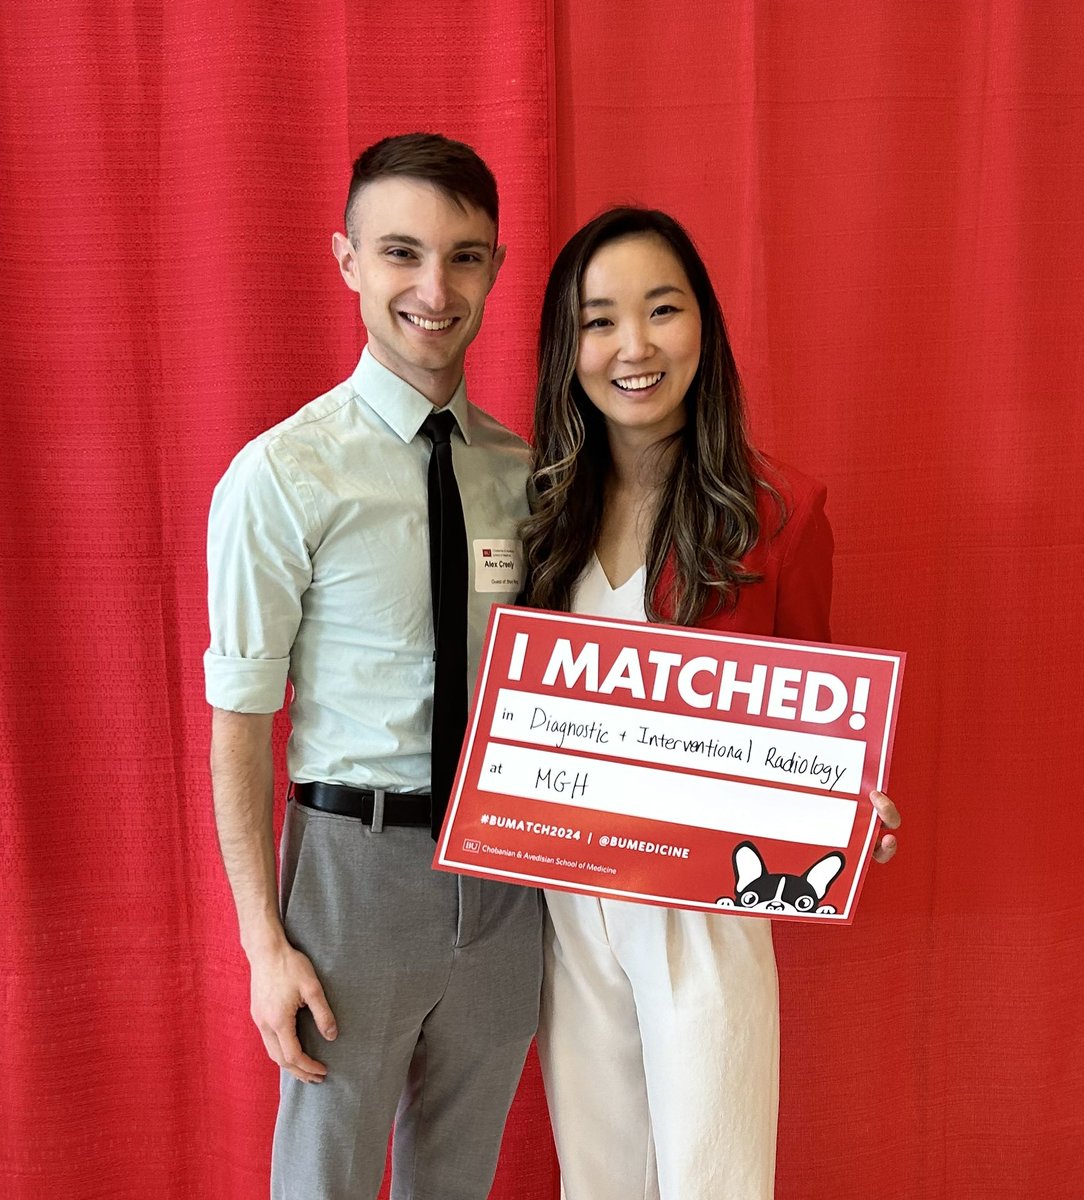 I am beyond excited to join the MGH IR/DR family for the next stage of my training!🎊🎉🍾 I am incredibly grateful to all the mentors, friends, and family members who have supported me throughout this journey! @mghradchiefs @MGHIR1 #match2024 #womeninradiology